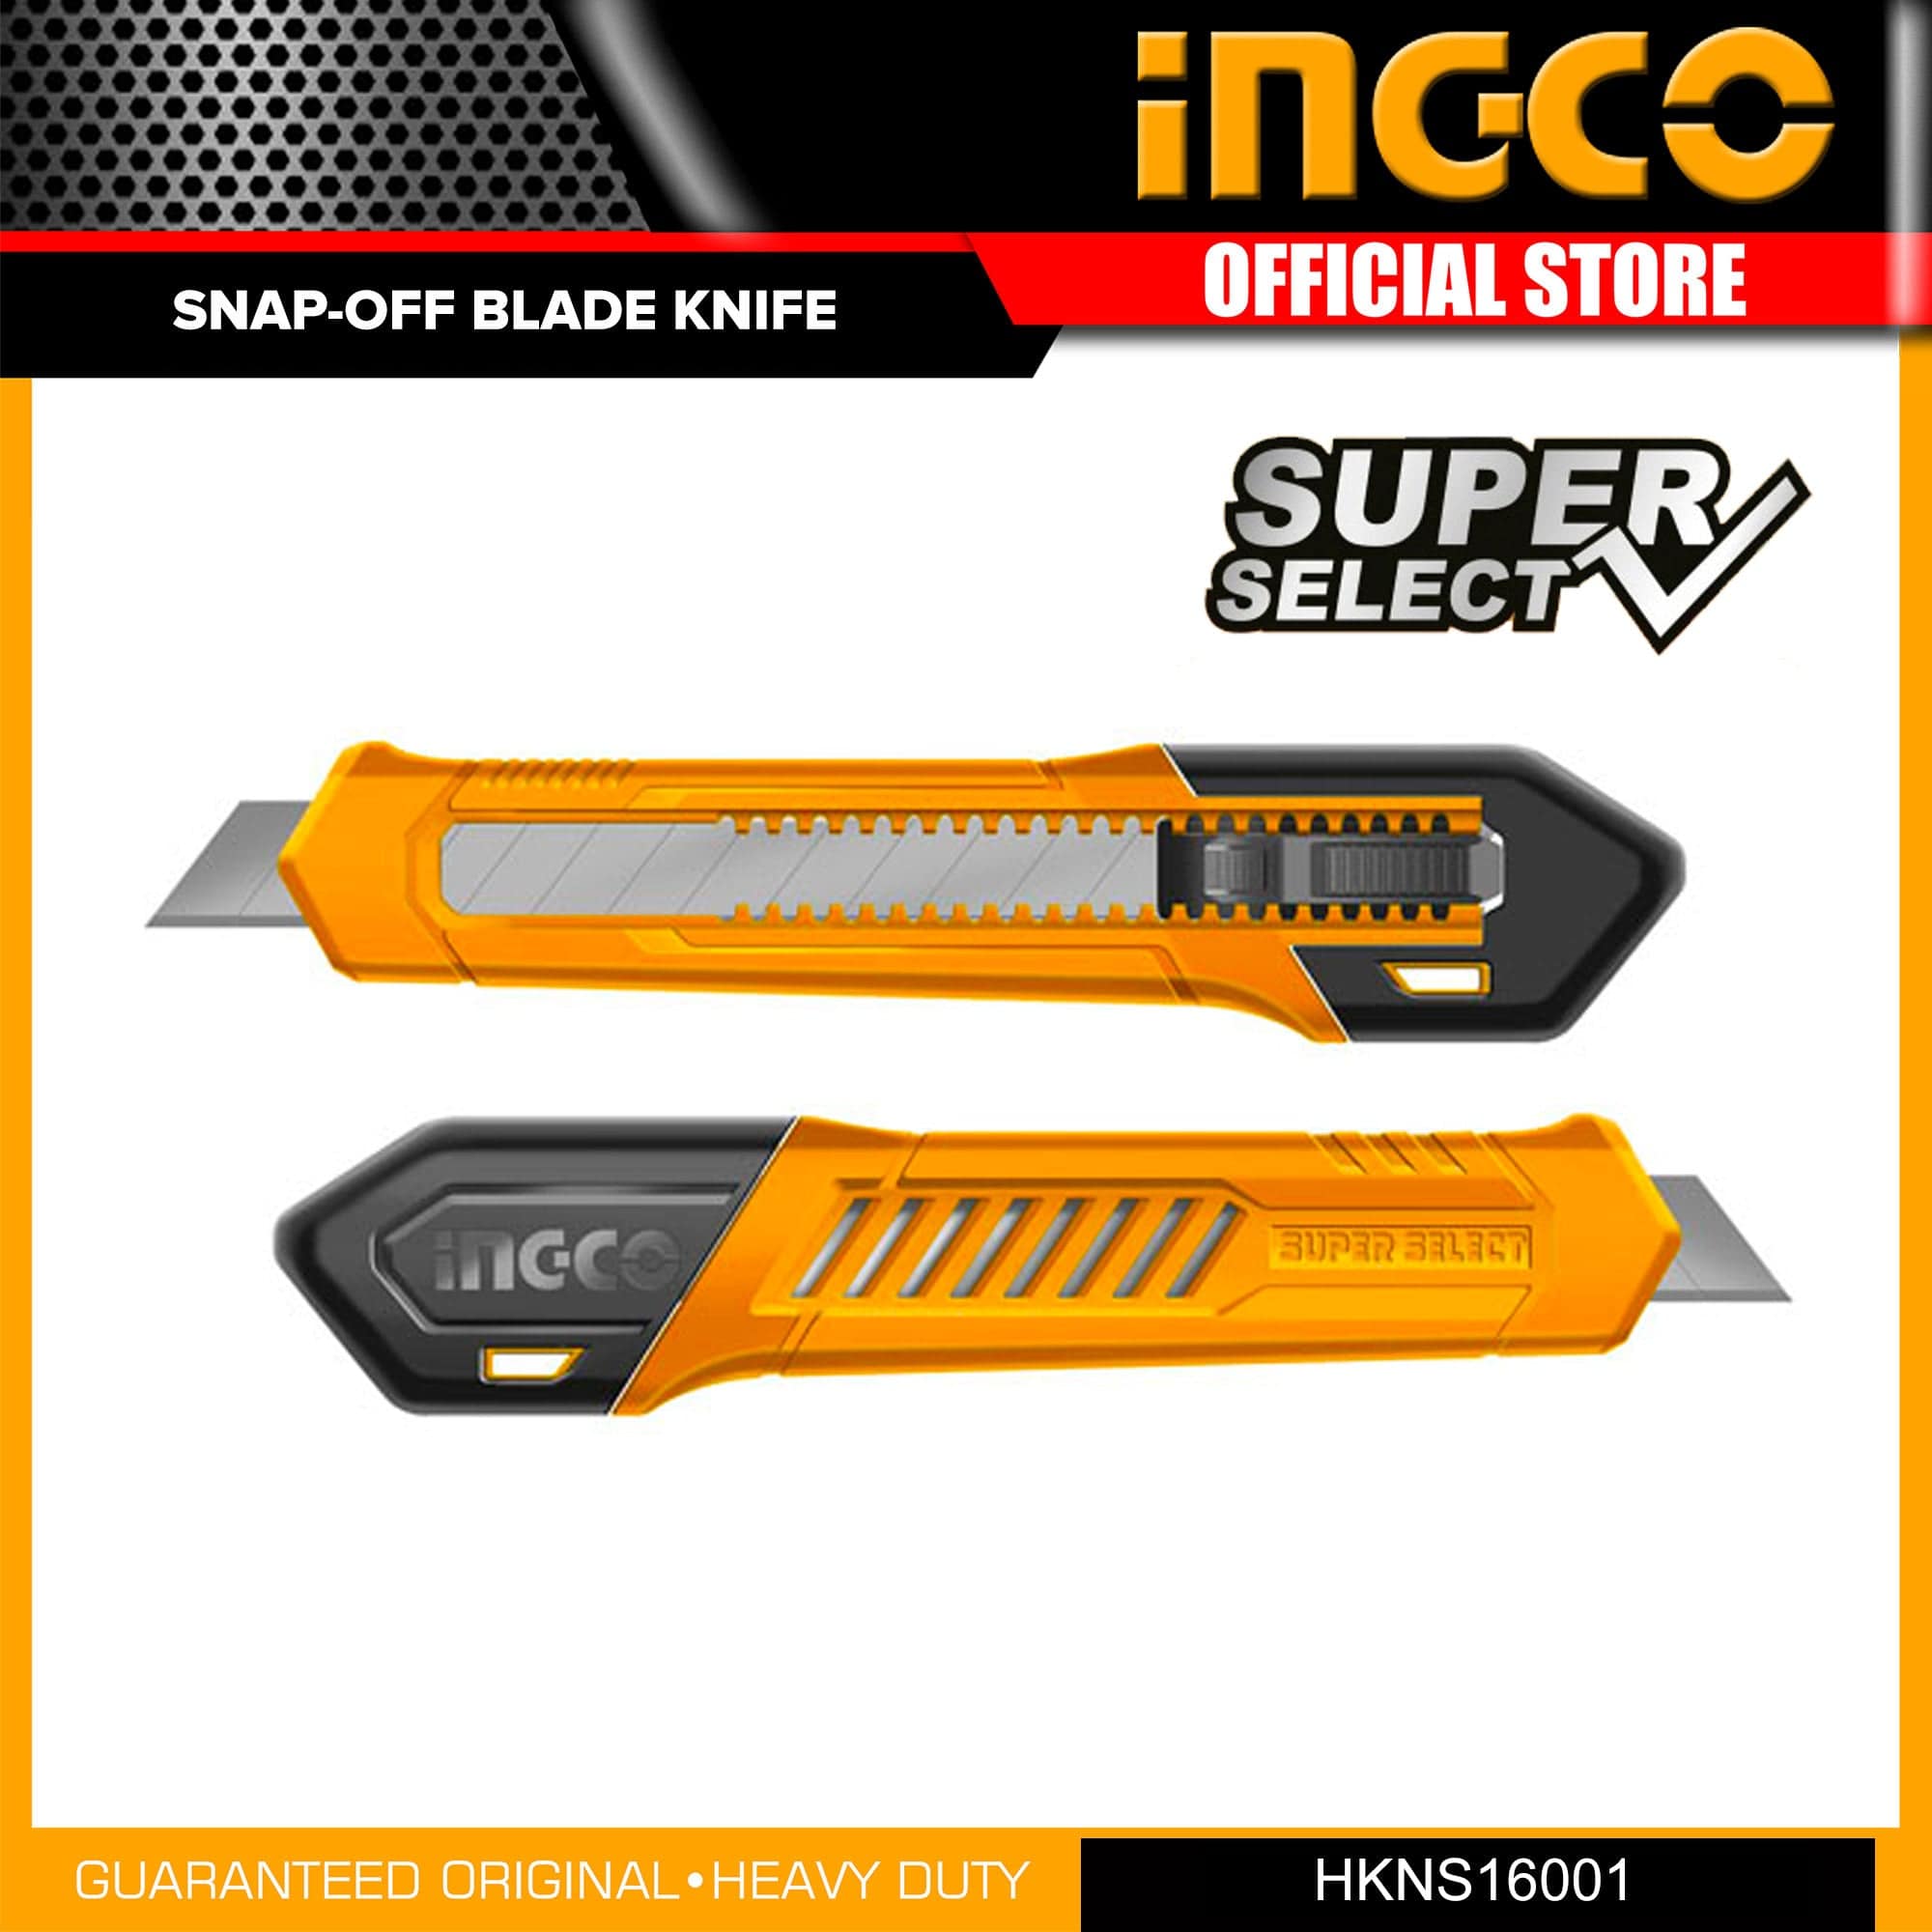 Ingco 18mm Snap-off Blade Knife HKNS16001 | Supply Master Accra, Ghana Multi Tools & Knives Buy Tools hardware Building materials